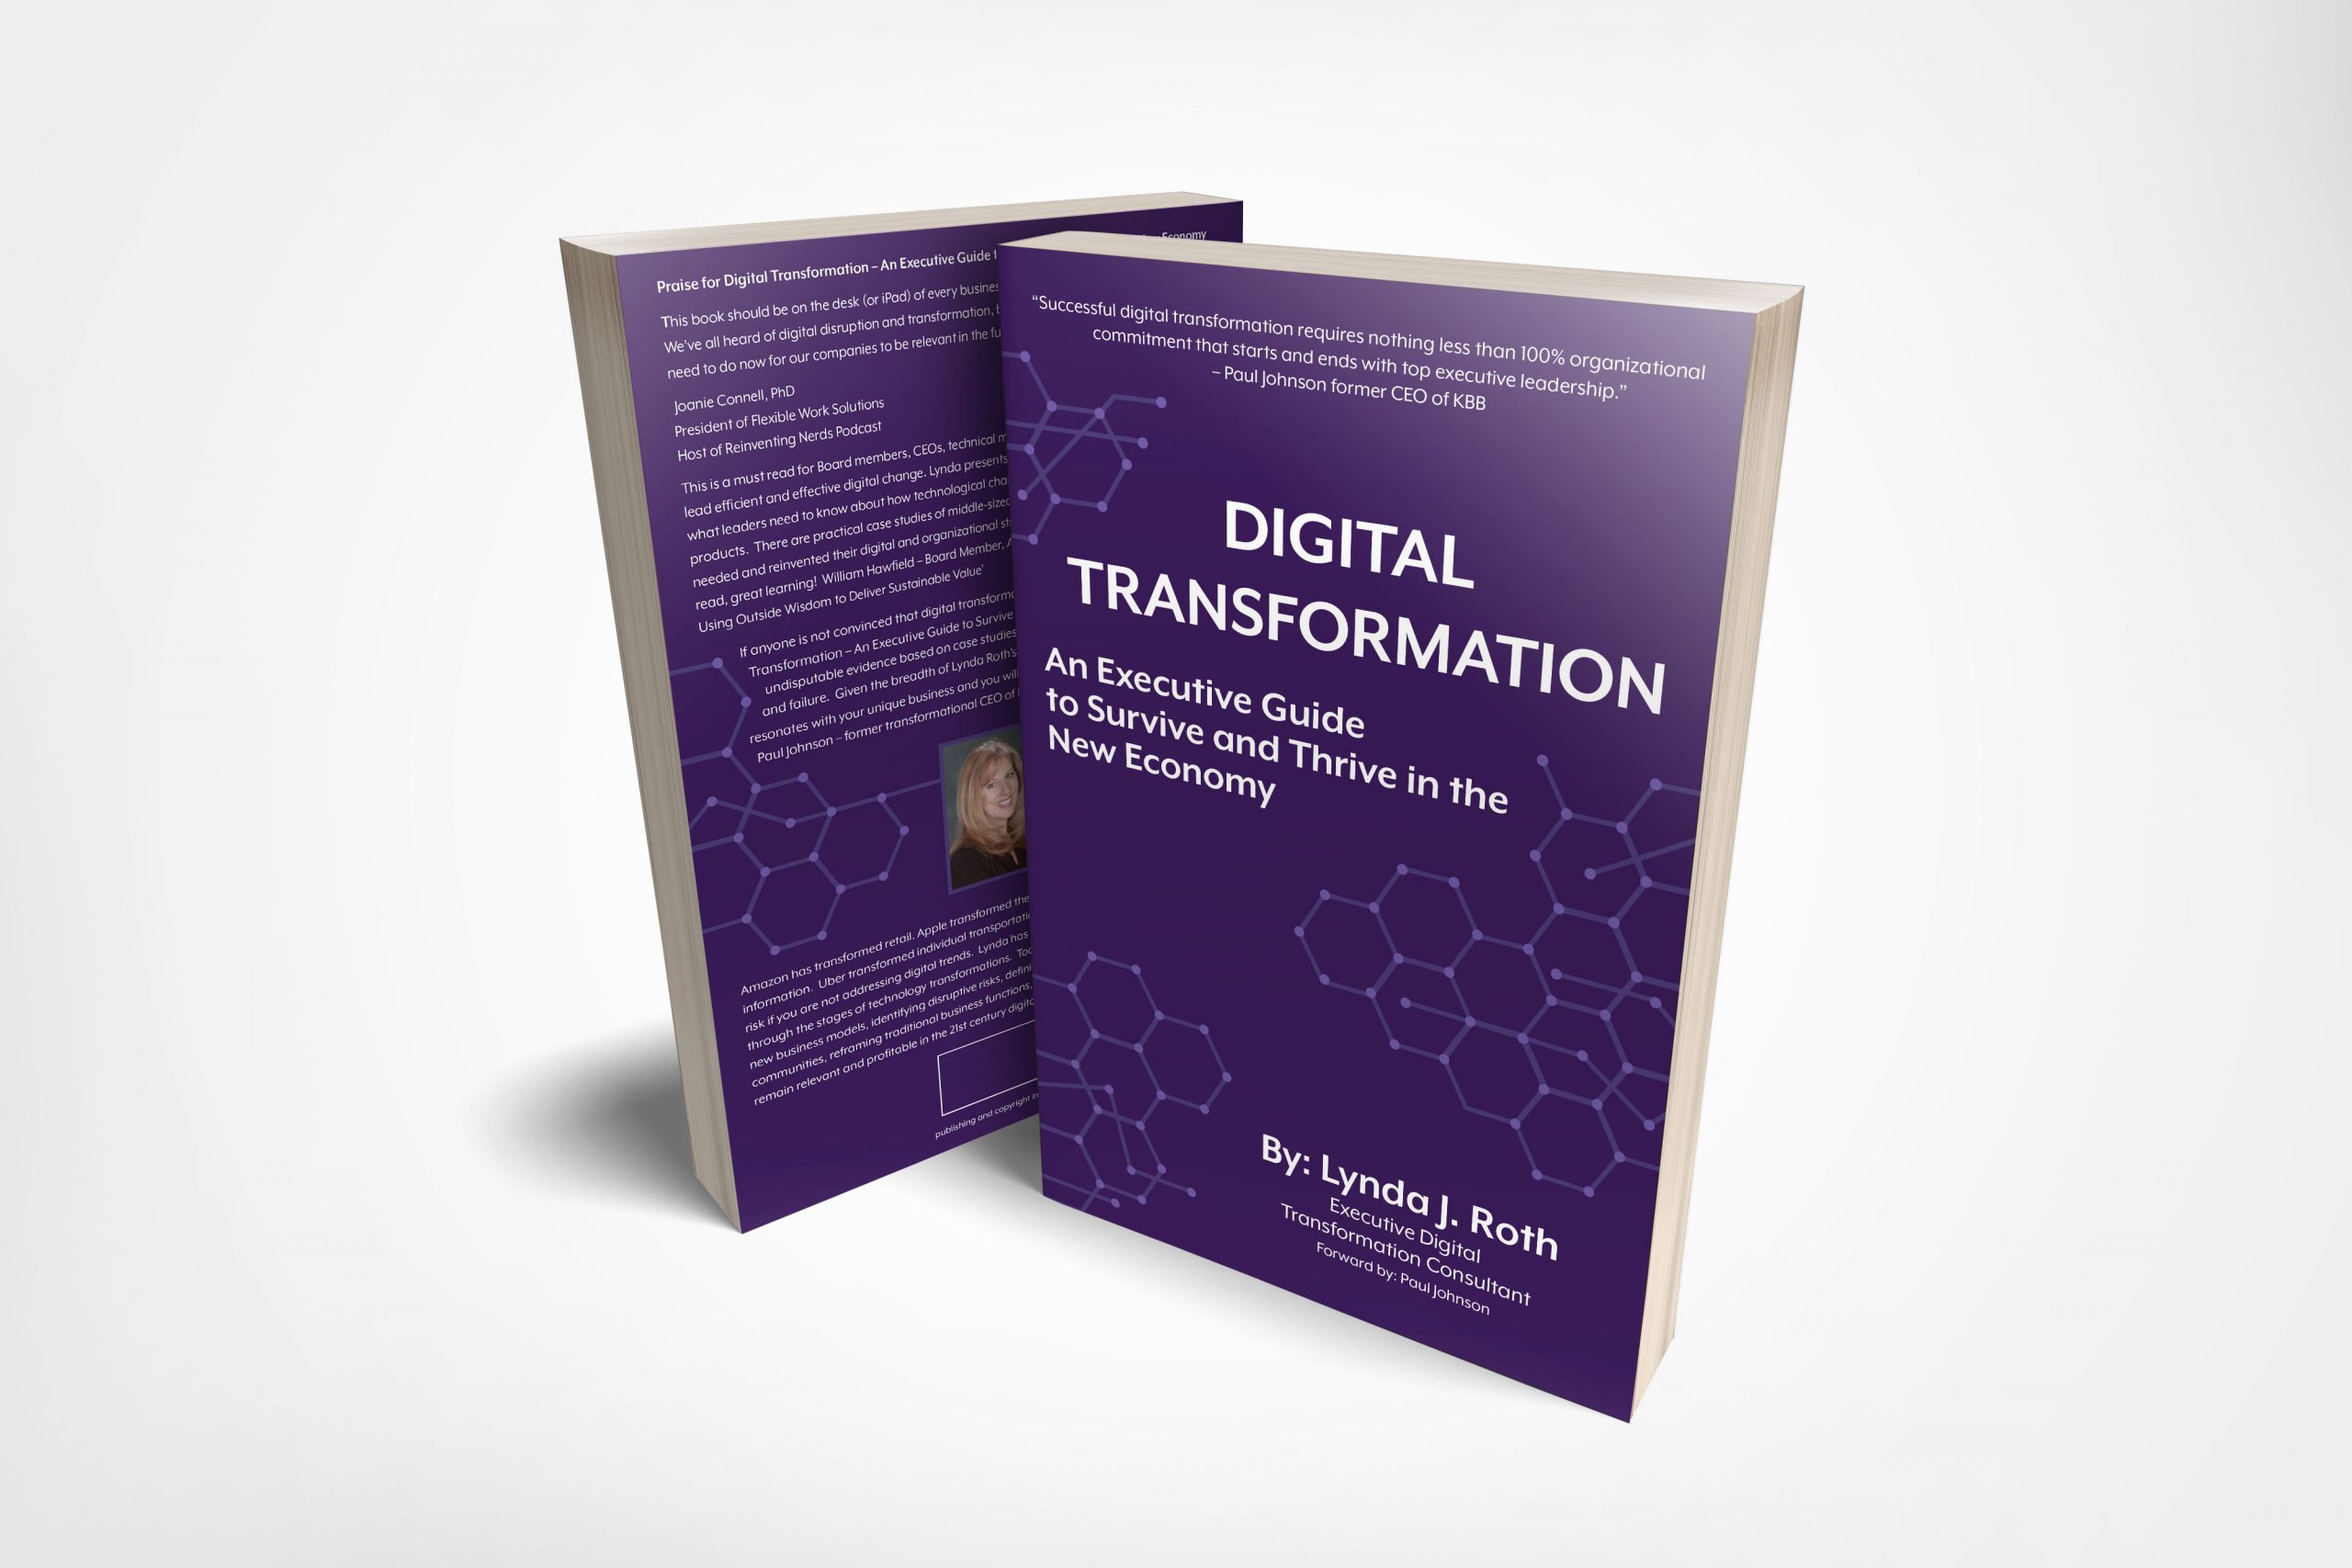 Digital Transformation: An Executive Guide to Survive and Thrive in the New Economy